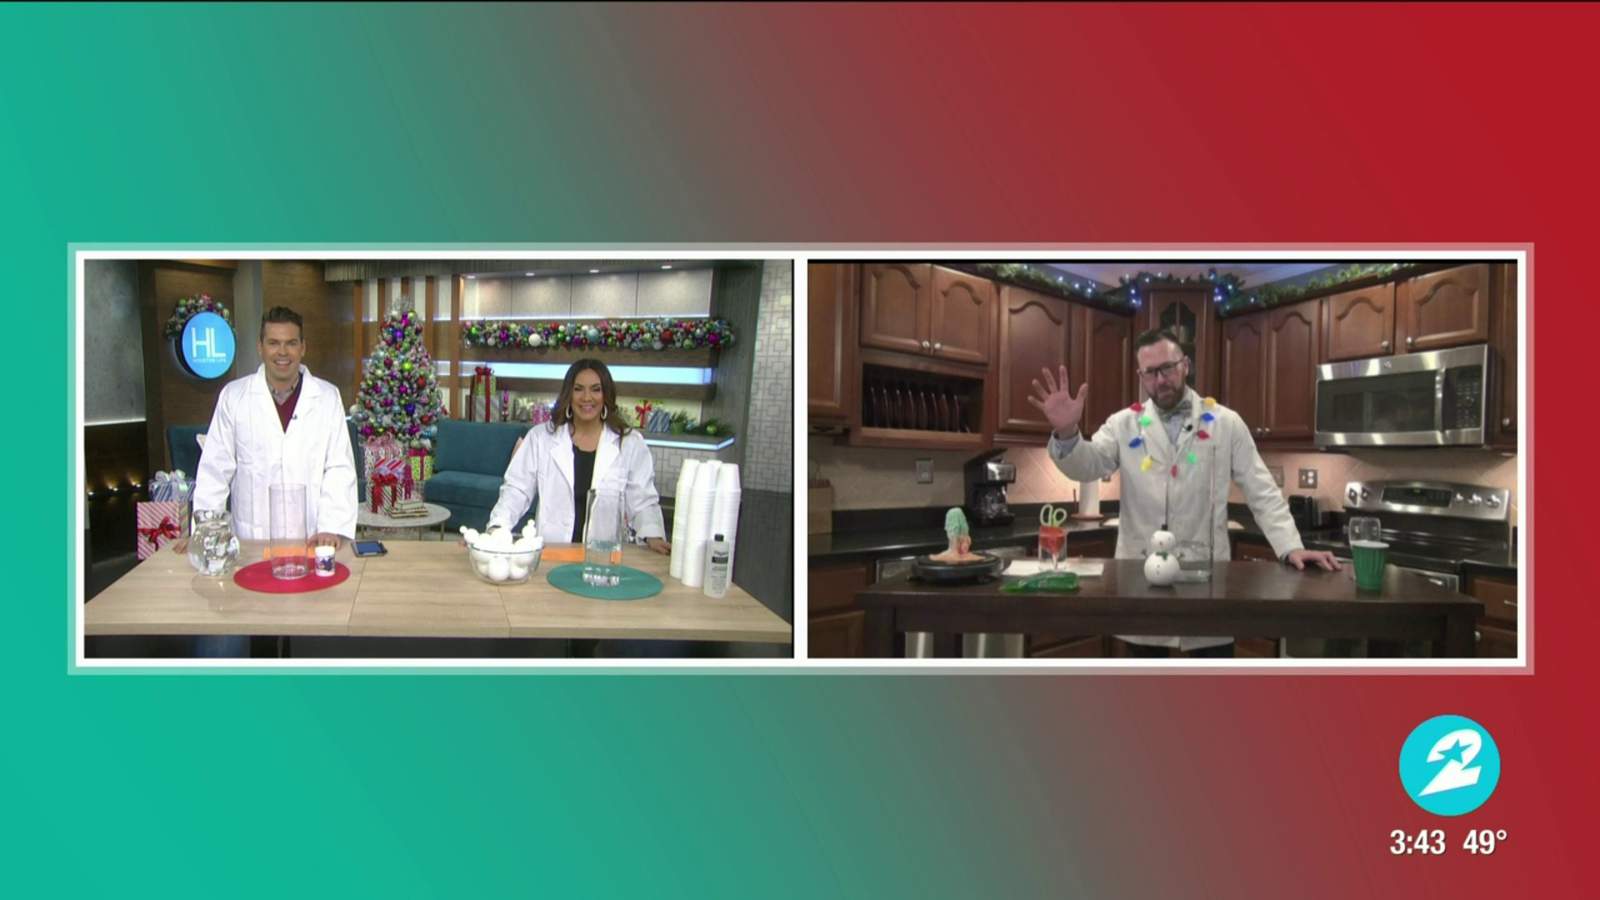 Science experiments to keep your kids busy during this holiday season